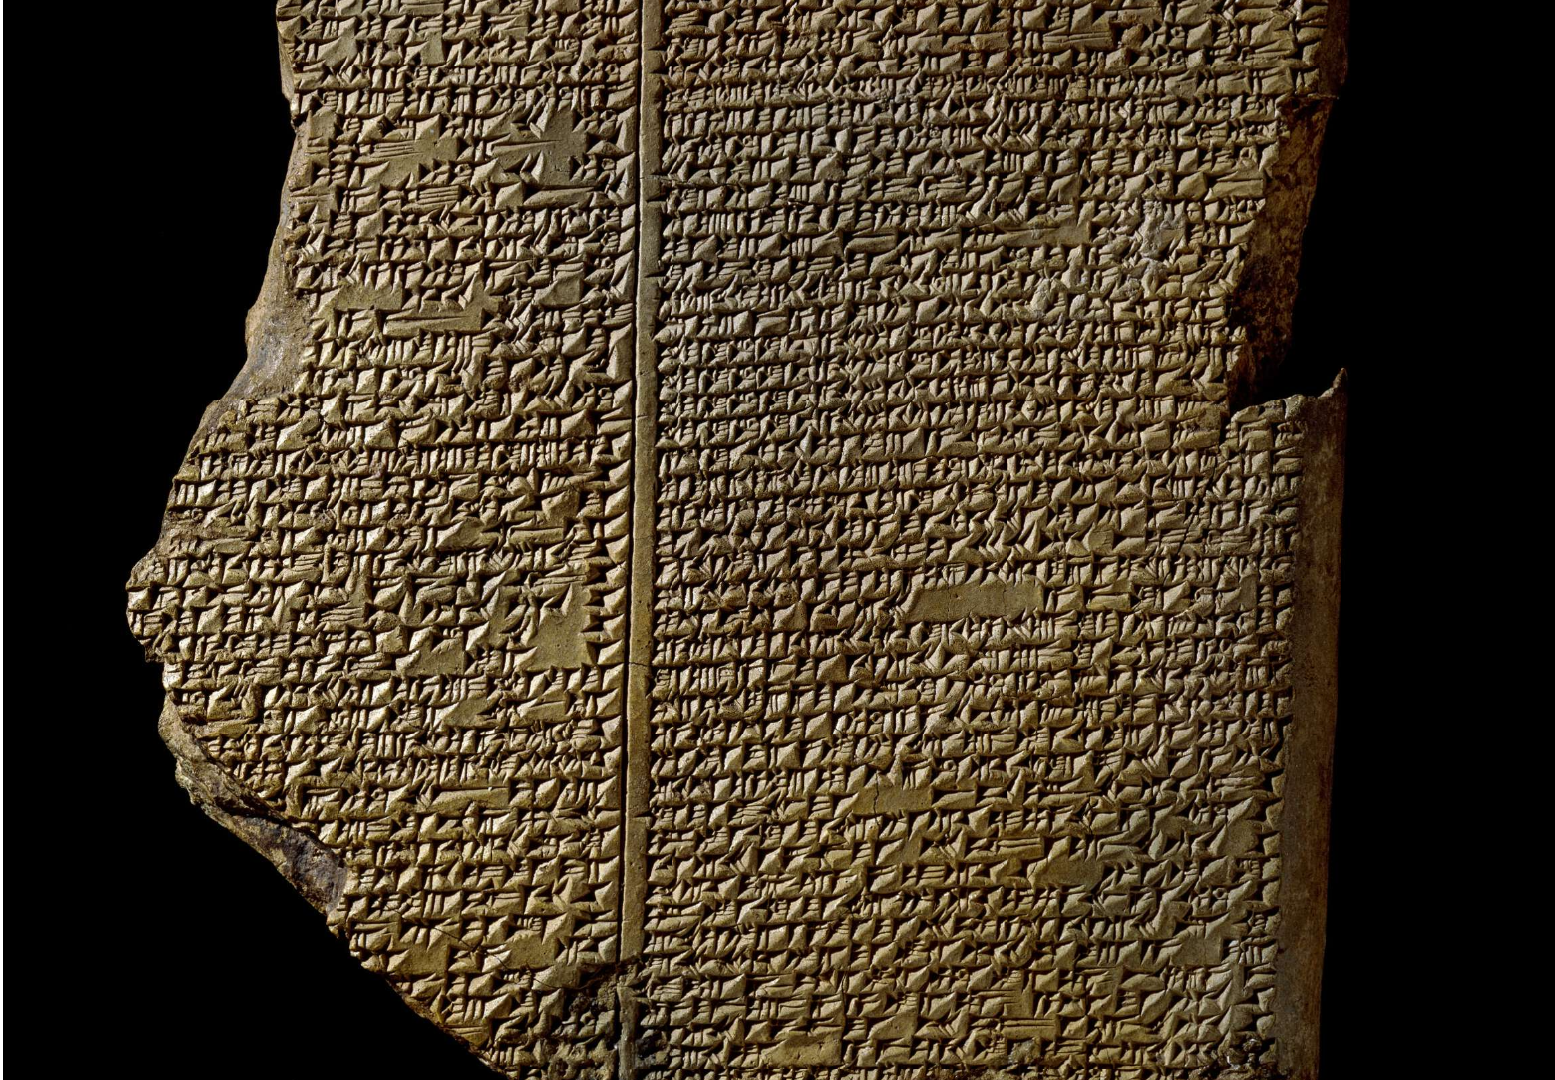 A clay tablet showing two distinct columns of cuneiform text. The edges of the tablet, particularly the left side, are broken.